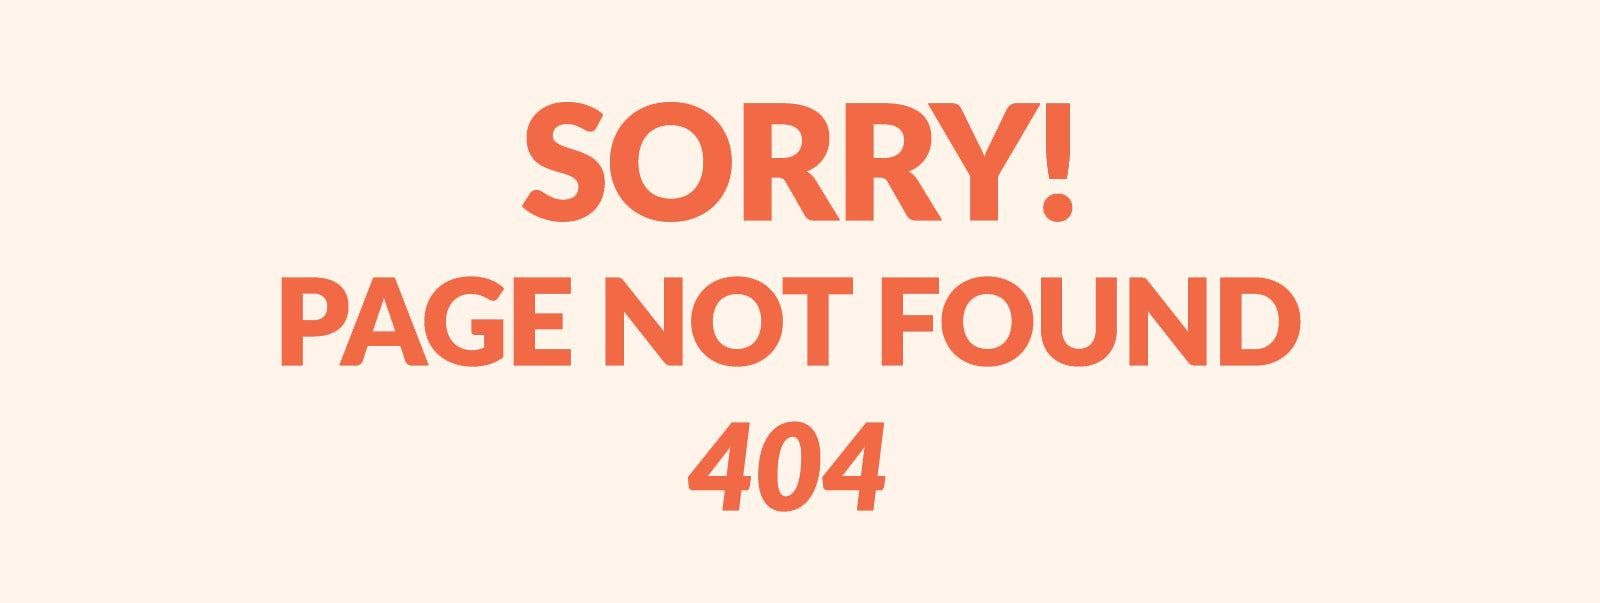 Sorry Page not found 404